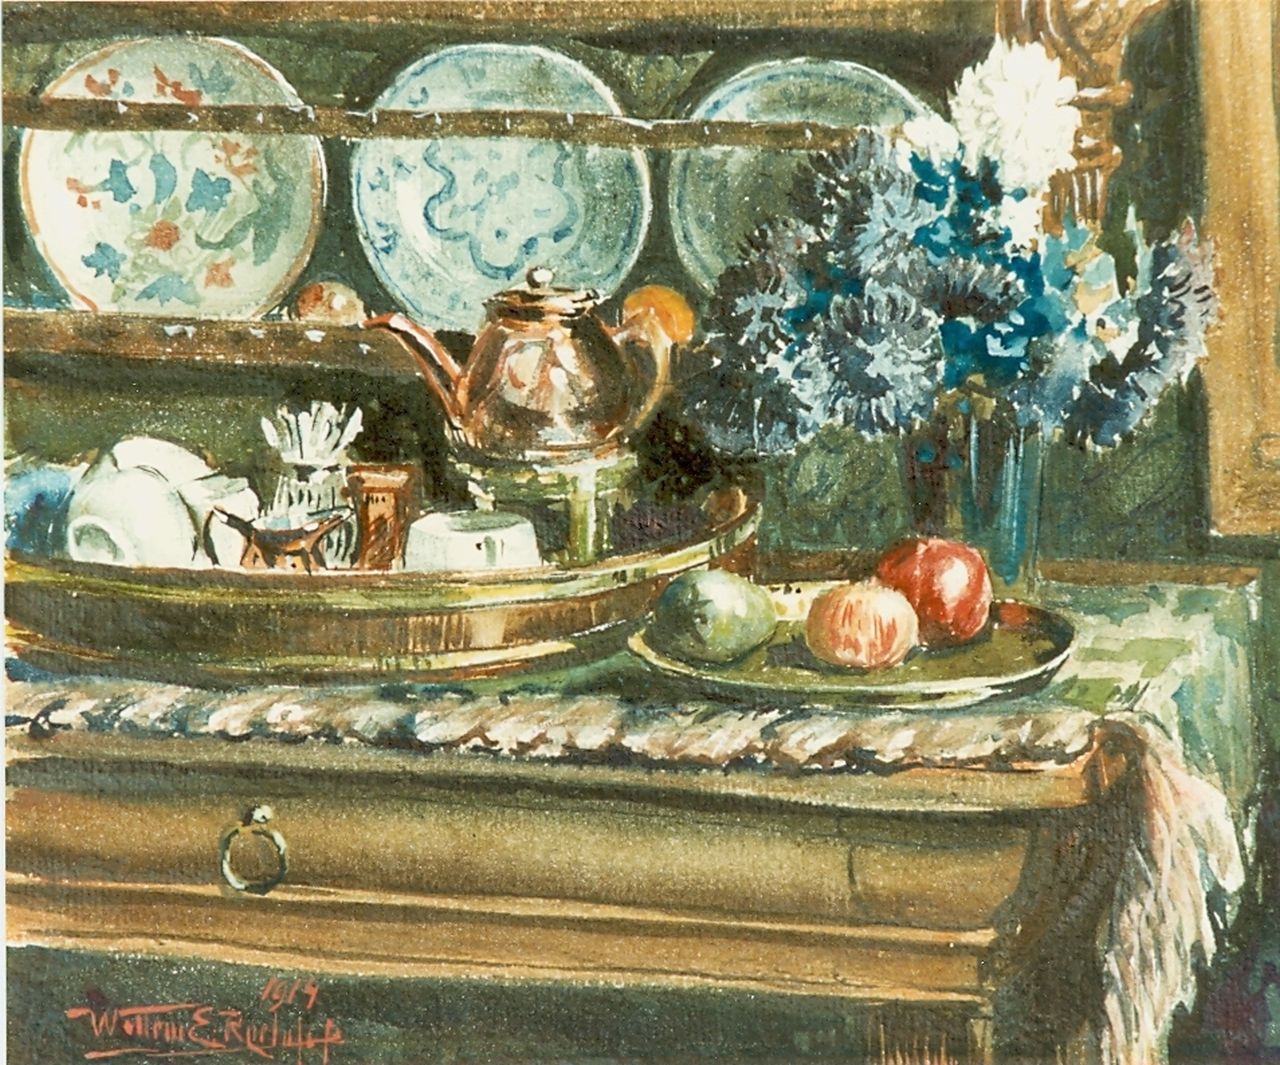 Roelofs jr. W.E.  | Willem Elisa Roelofs jr., Buffet with tableware, watercolour on paper 20.0 x 26.0 cm, signed l.l. and dated 1914